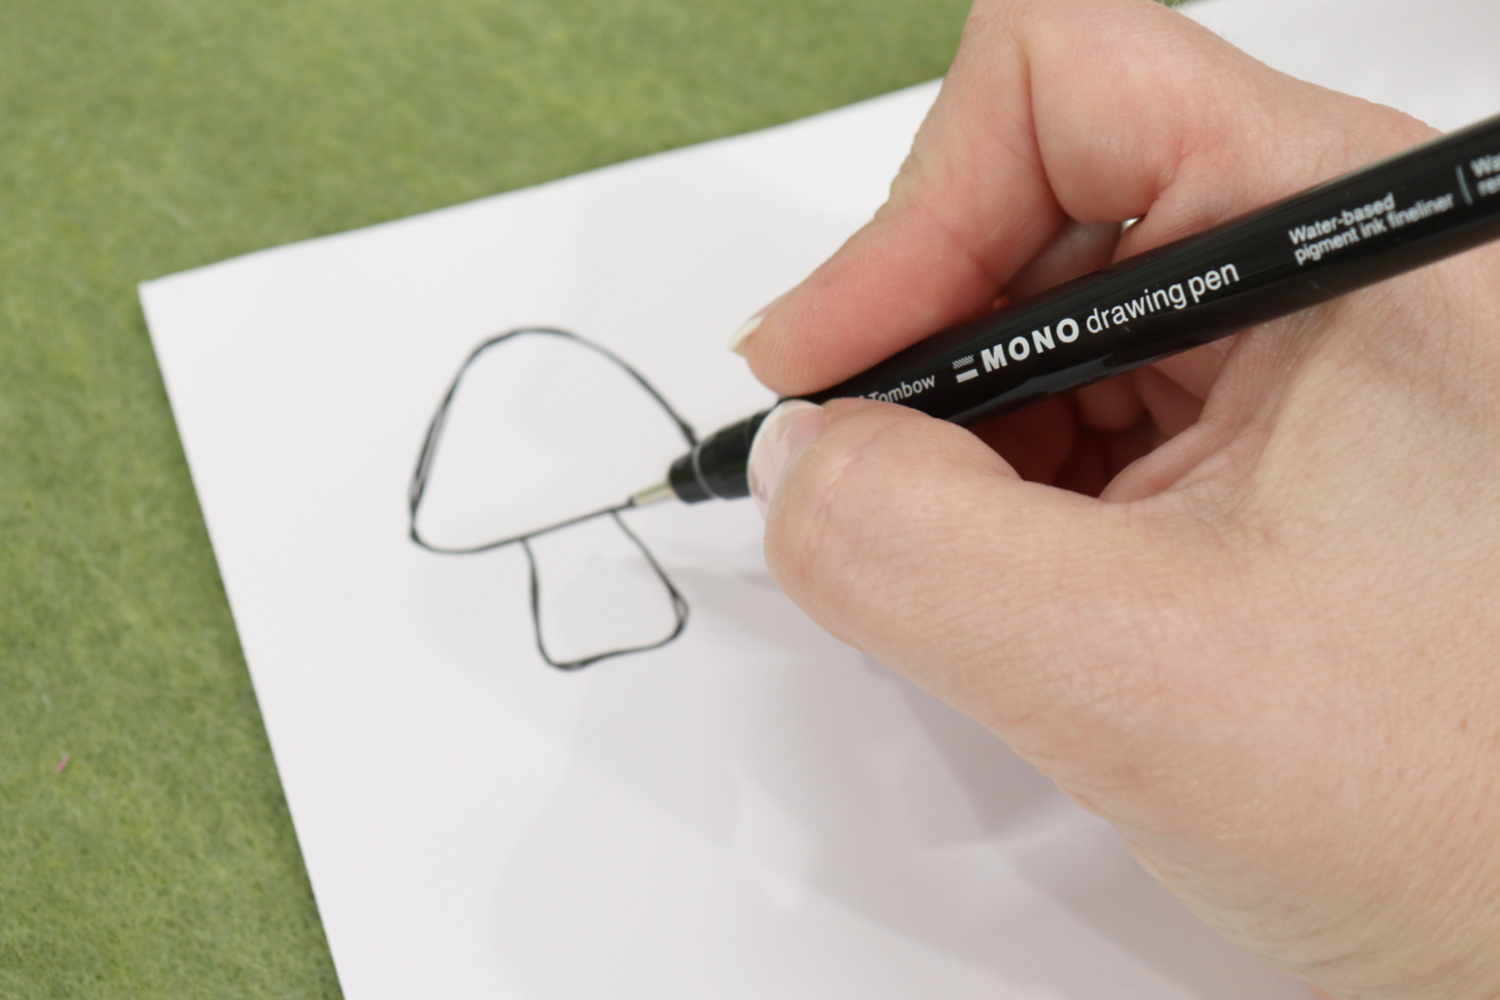 Image contains Amy’s hand holding a MONO Drawing Pen and sketching a toadstool on white printable vinyl. The background is olive green felt.